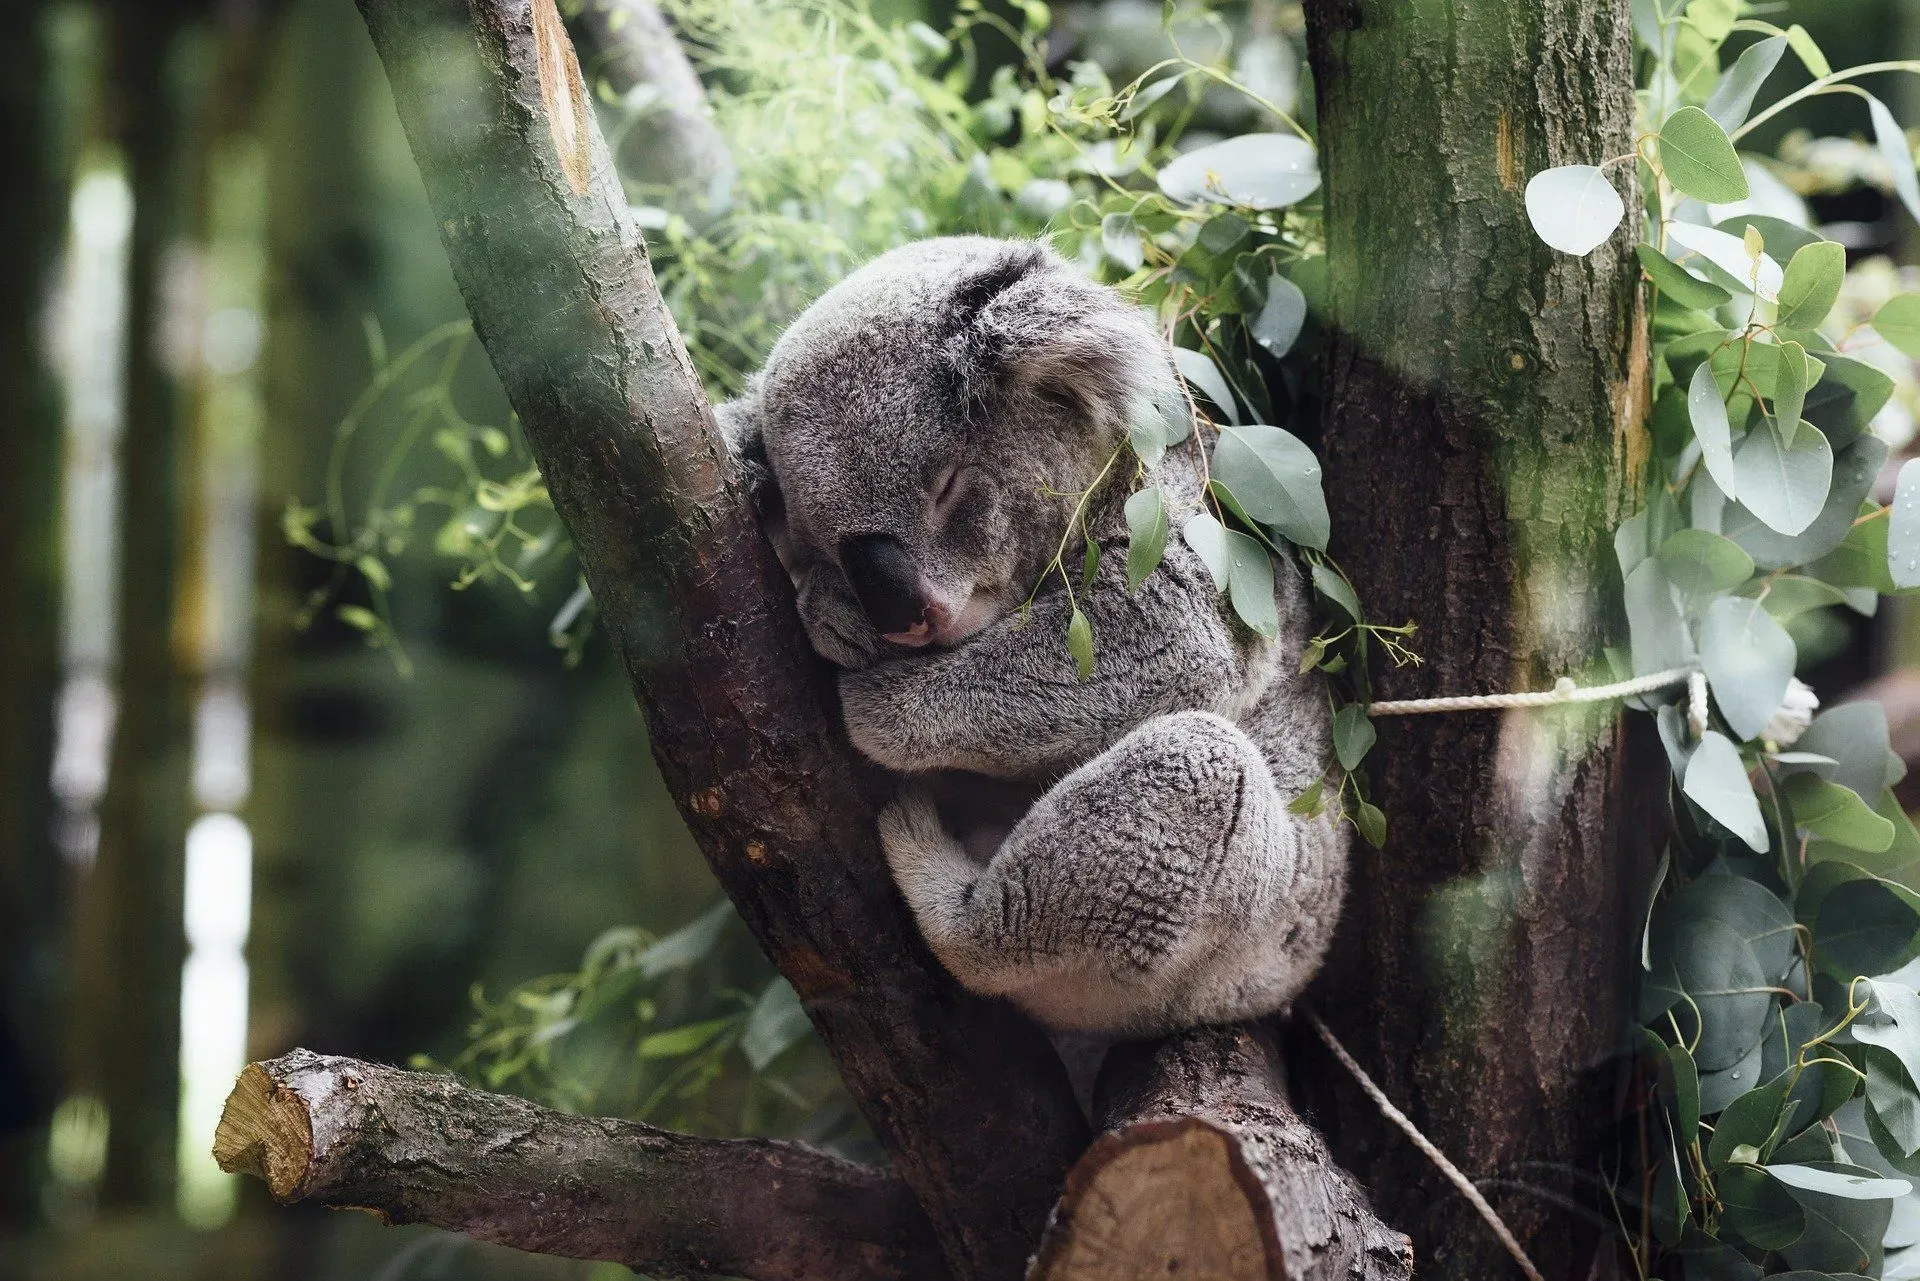 Read these fun facts about animal that live in trees.